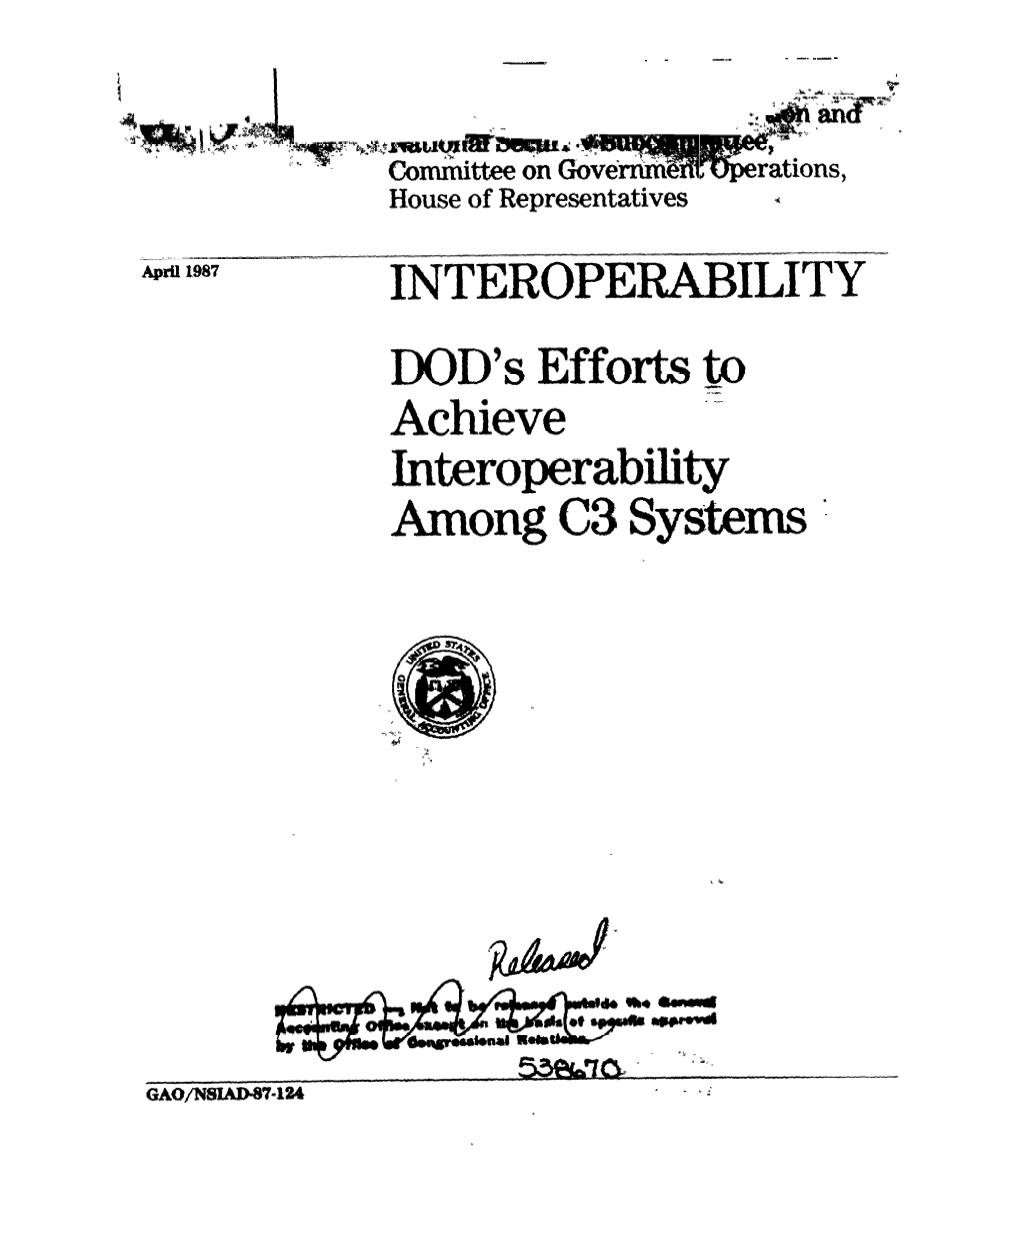 DOD's Efforts to Achieve Interoperability Among C3 Systems